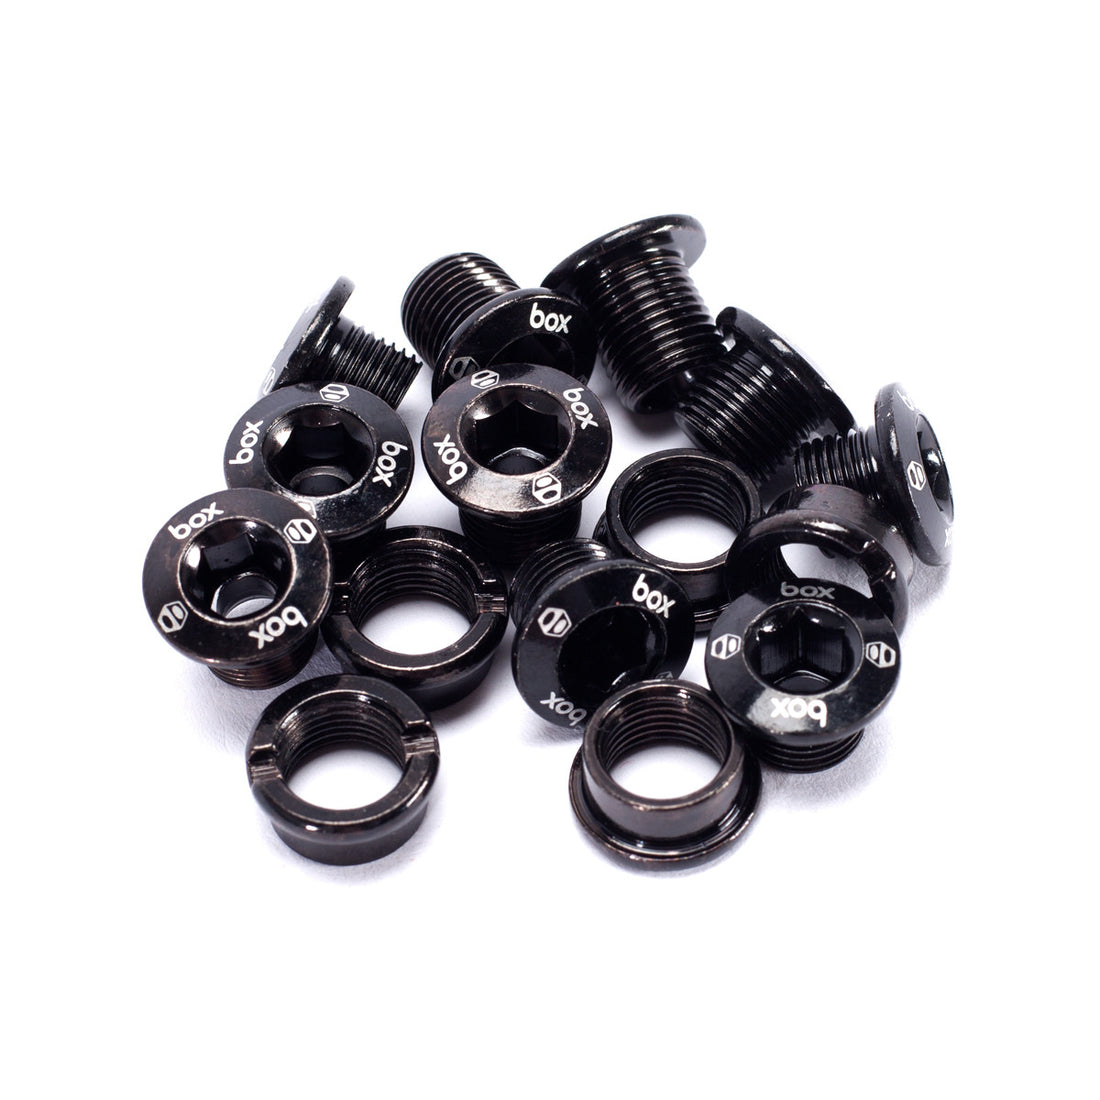 Box One Chromoly Chainring Bolts - boxcomponents